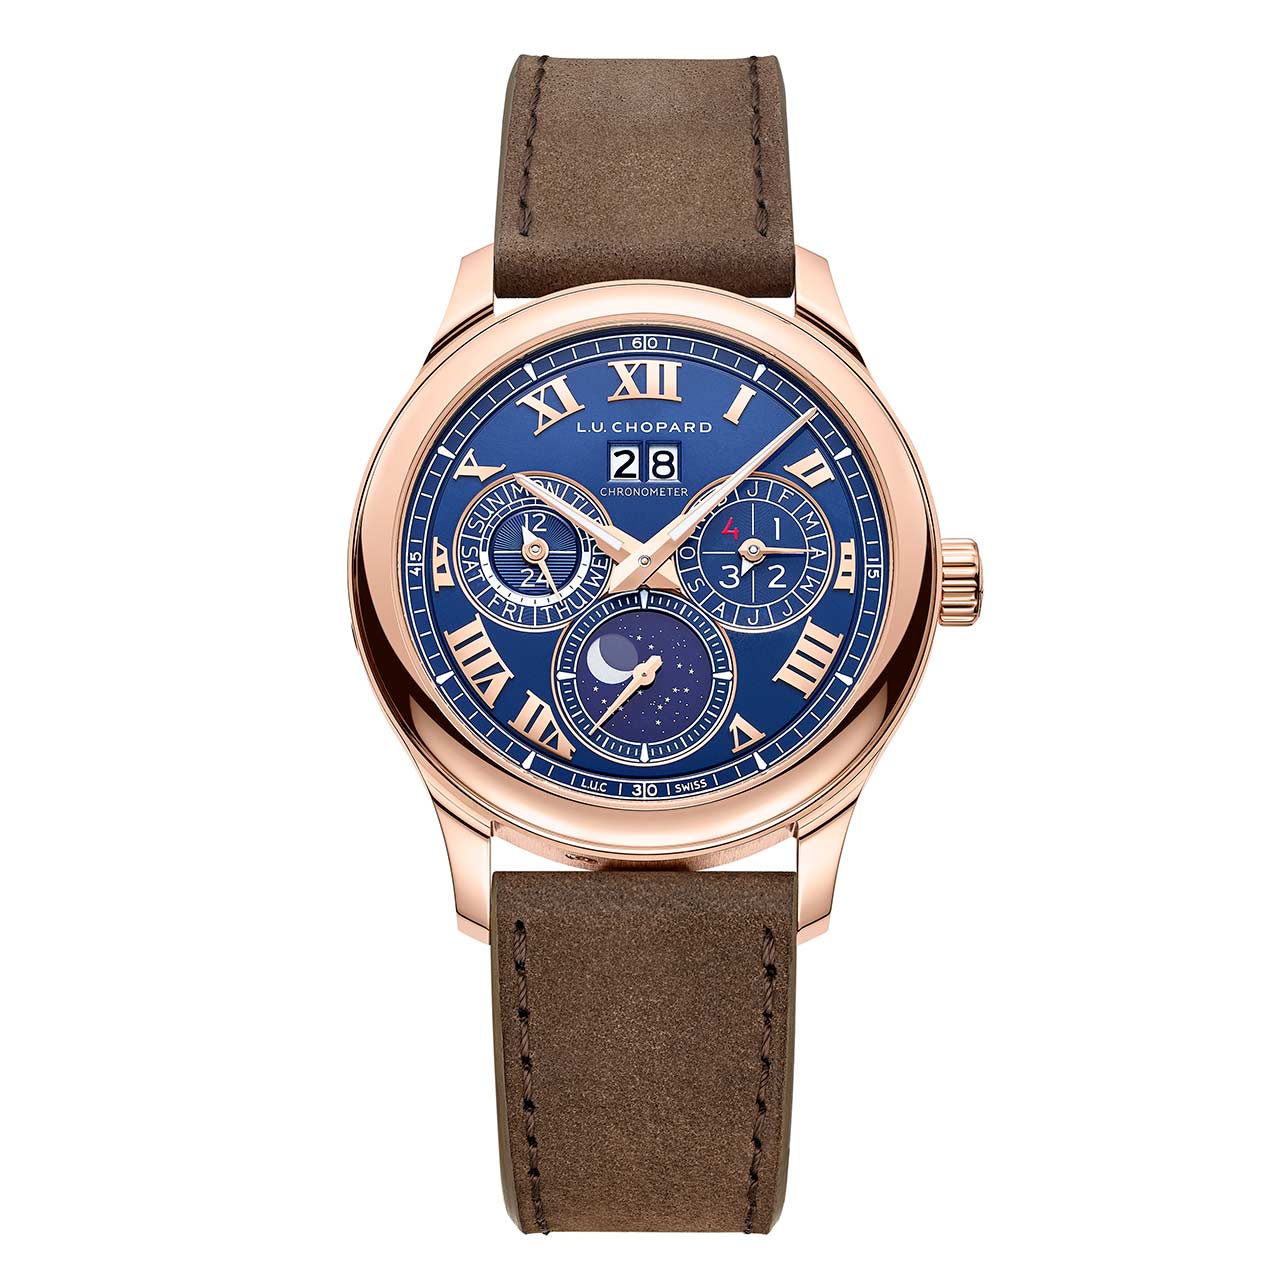 Chopard - L.U.C Lunar One Perpetual | Time and Watches | The watch blog